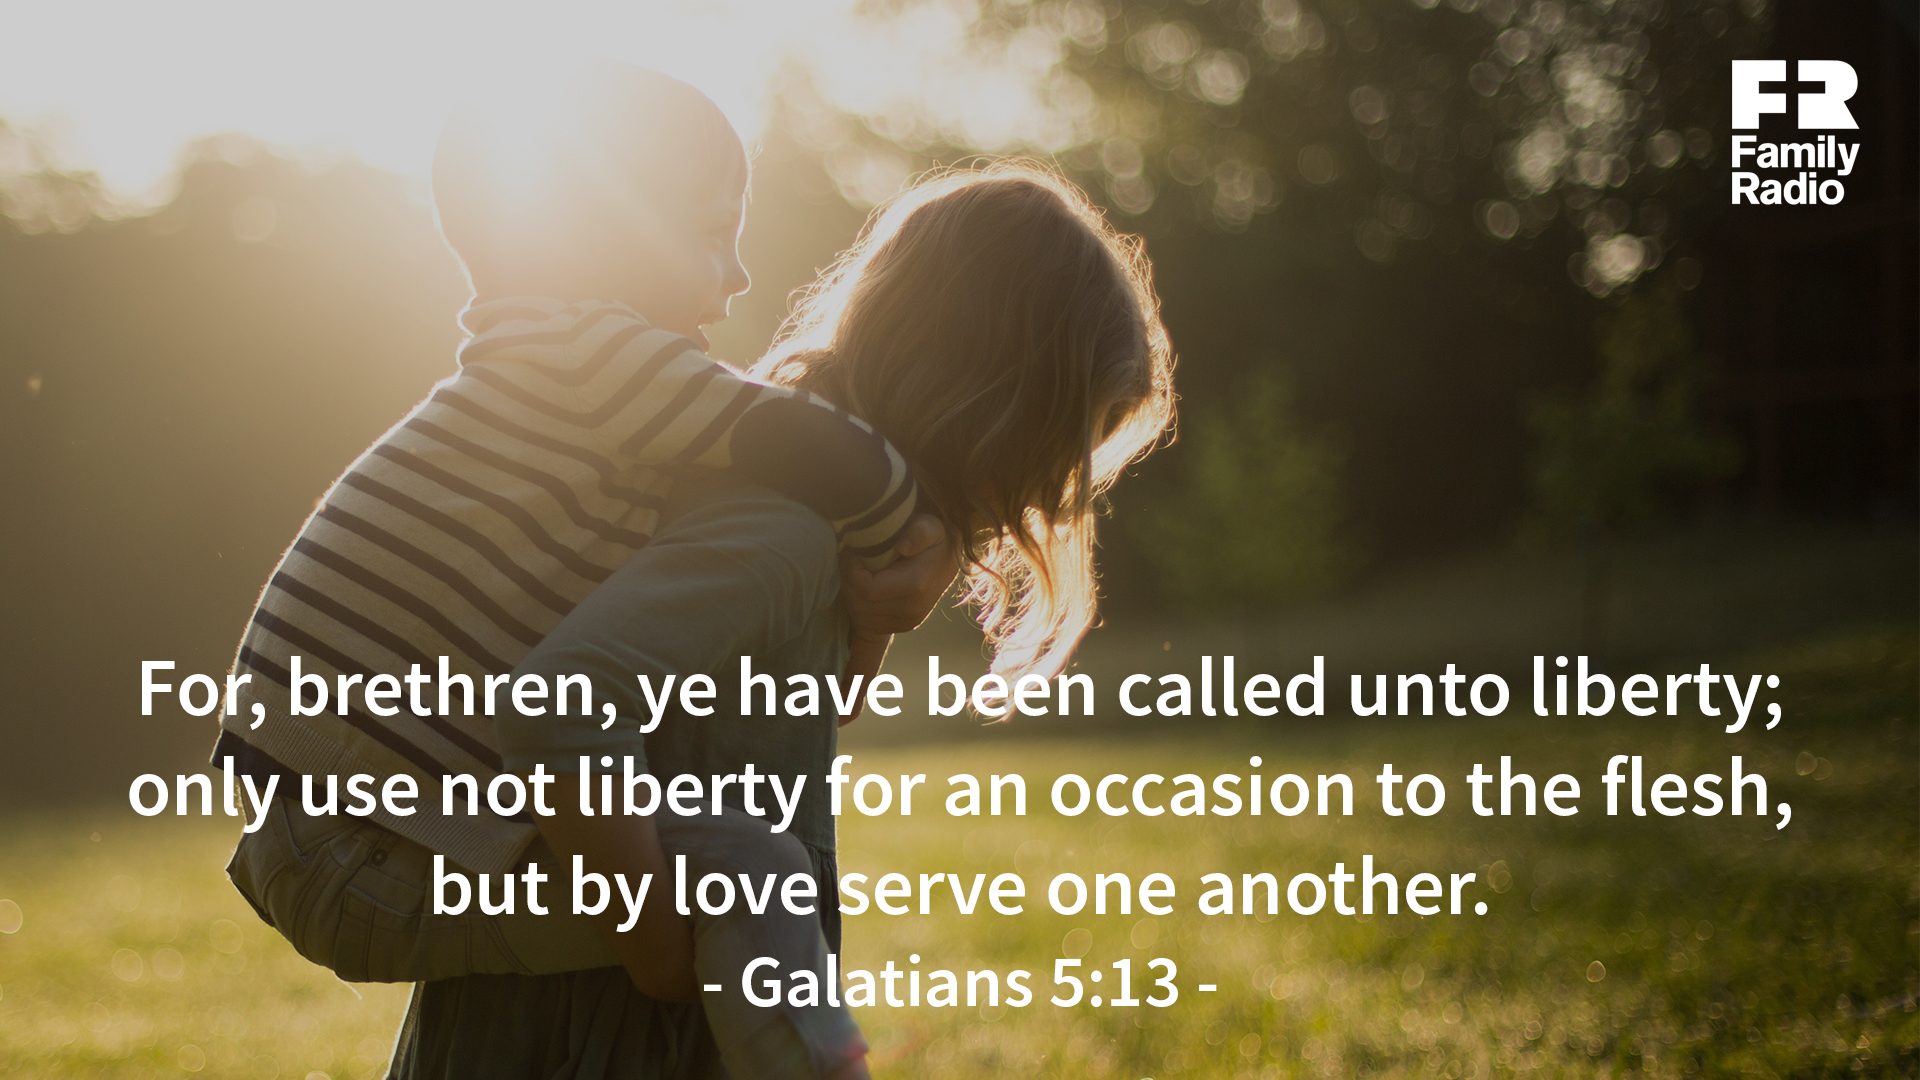 "For, brethren, ye have been called unto liberty; only use not liberty for an occasion to the flesh, but by love serve one another."